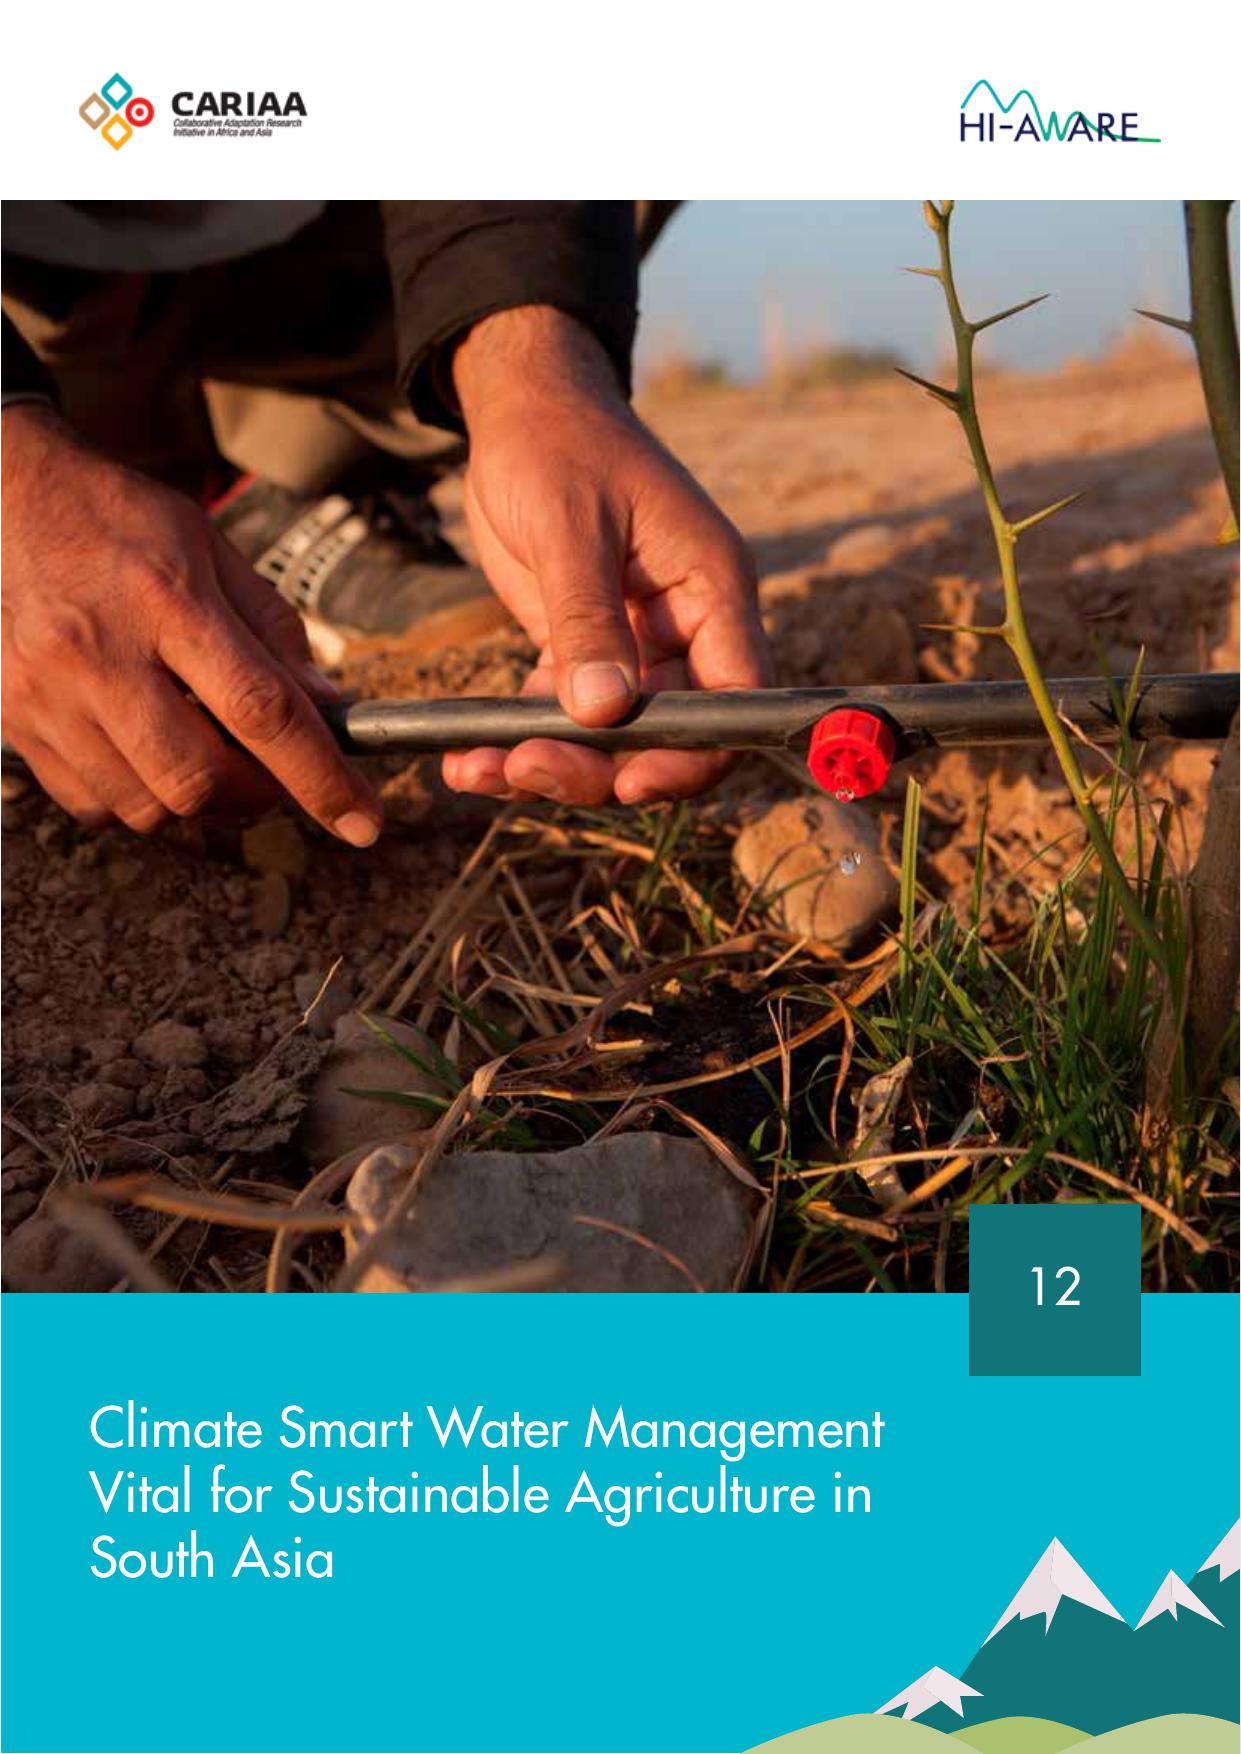 Climate smart water management vital for sustainable agriculture in South Asia